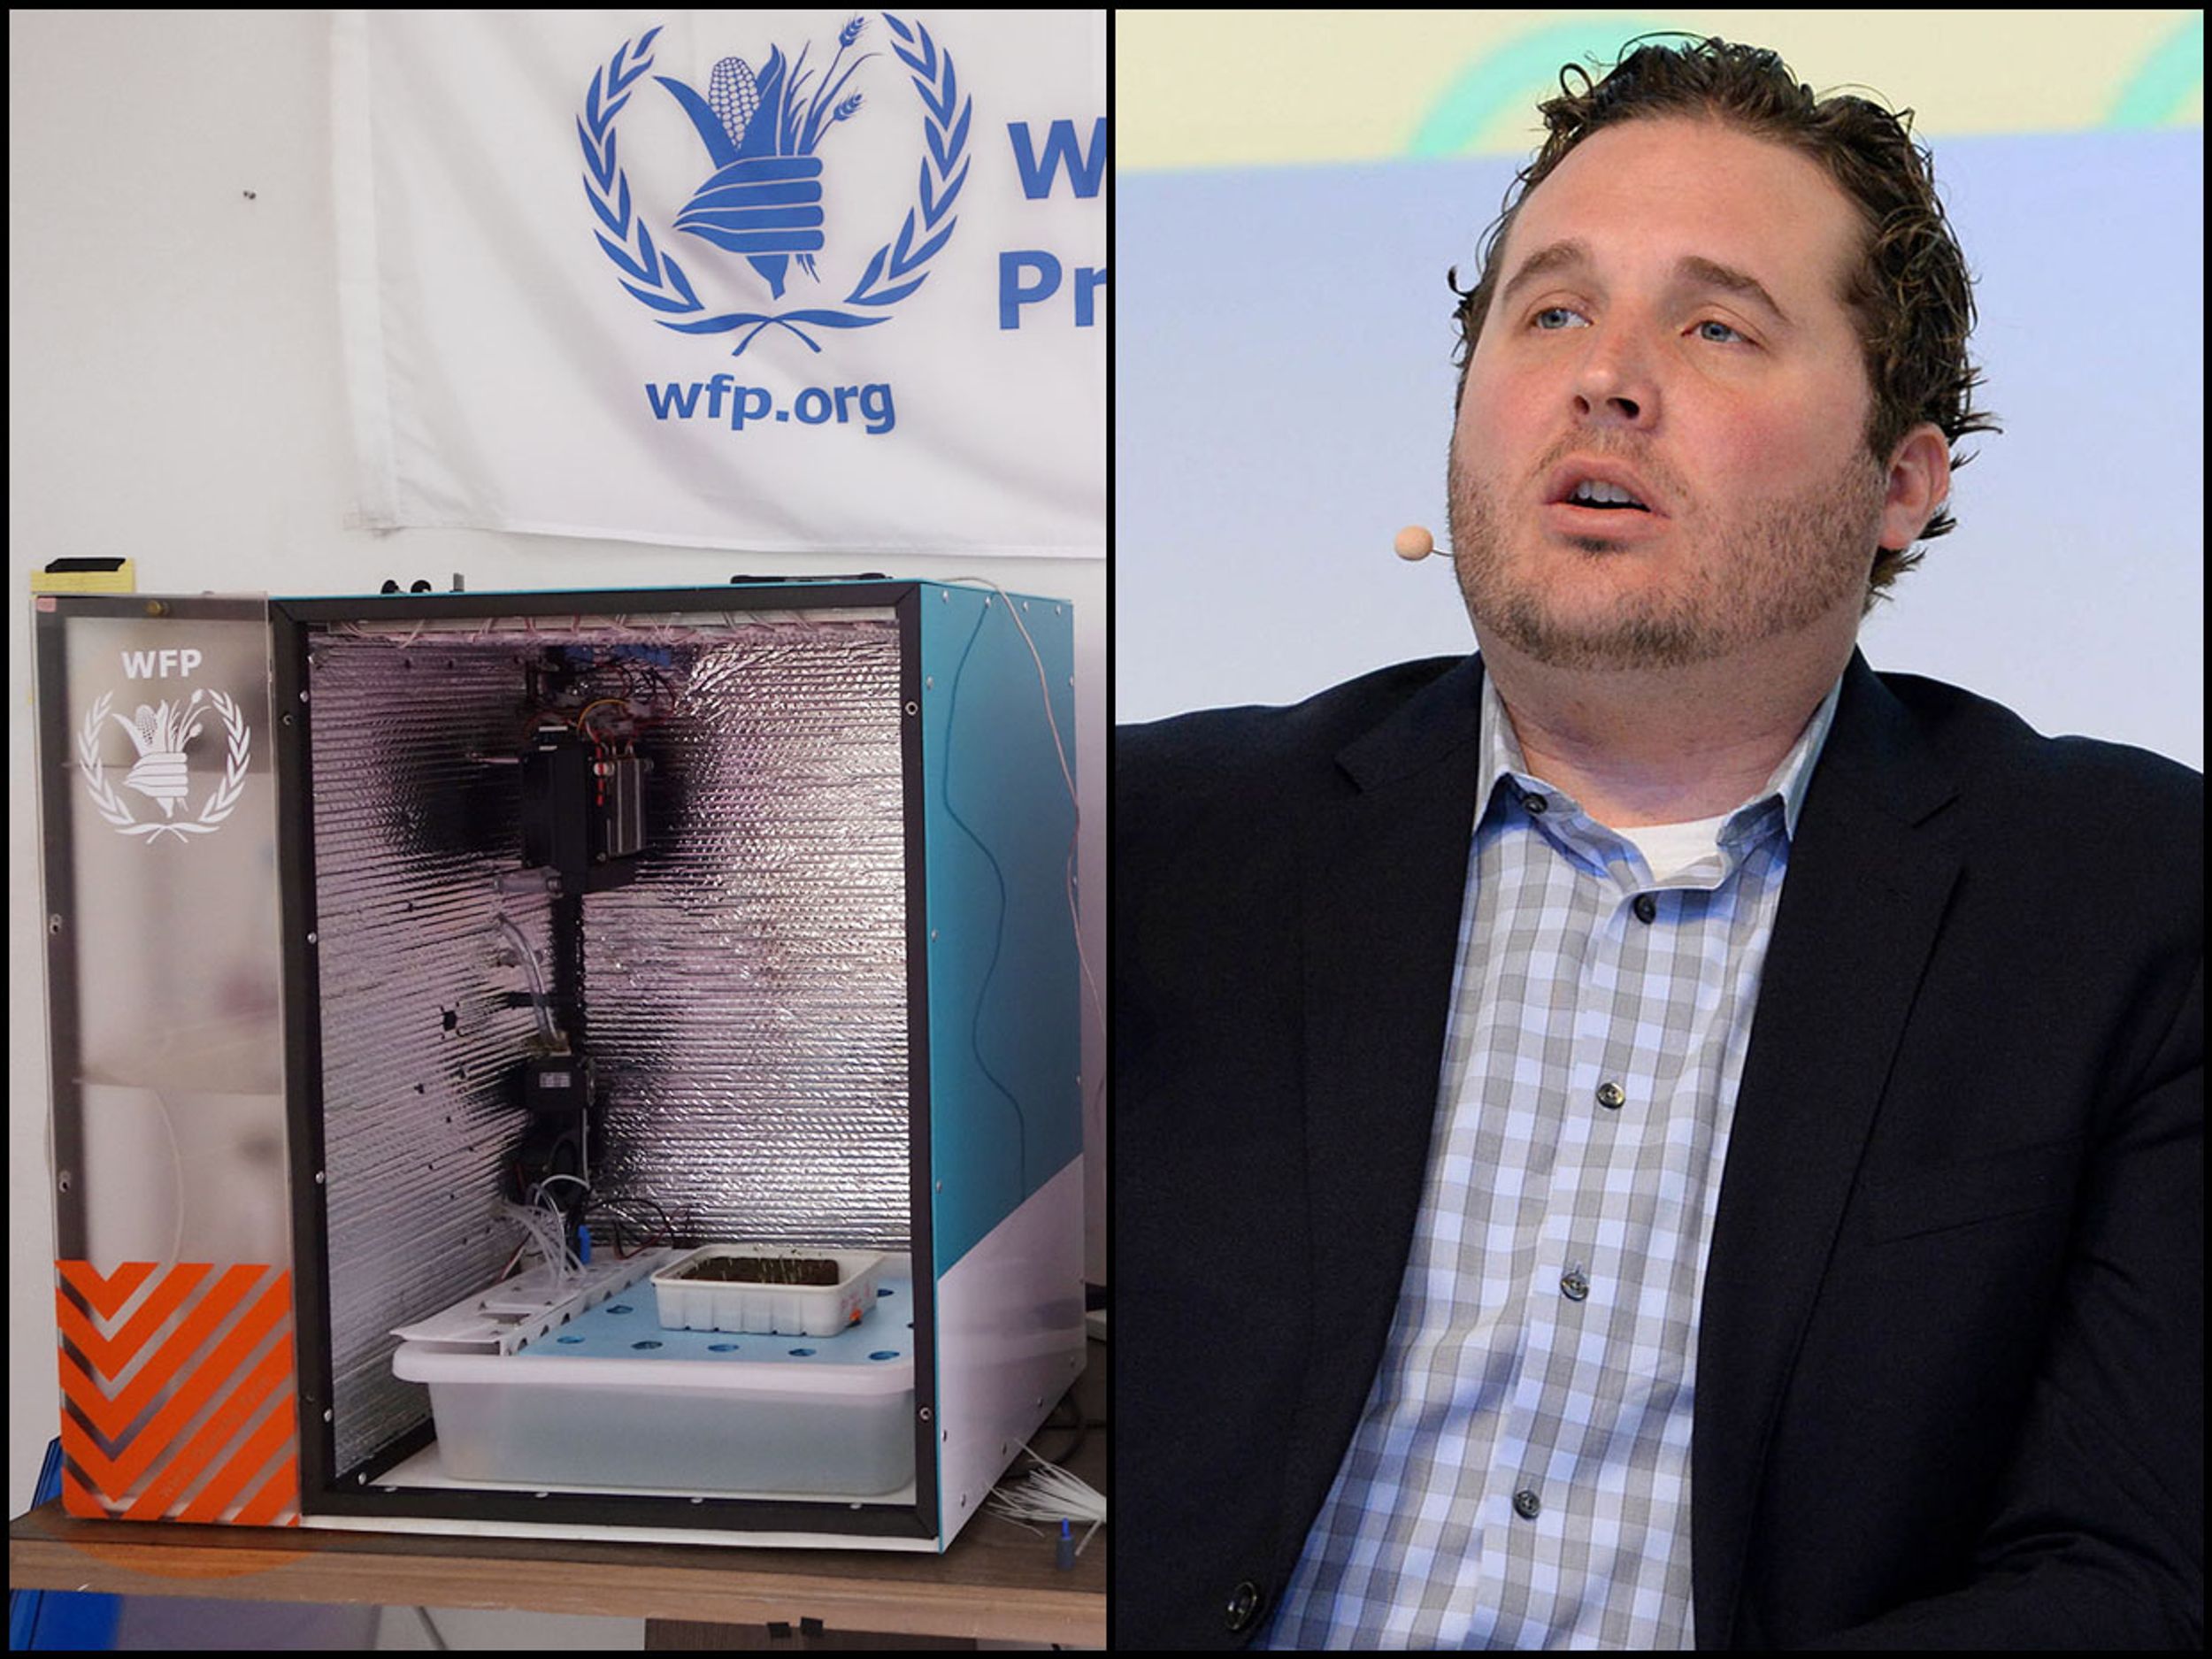 Left: A food computer at the World Food Programme office in Amman, Jordan. Right: Caleb Harper at DLD17 conference.